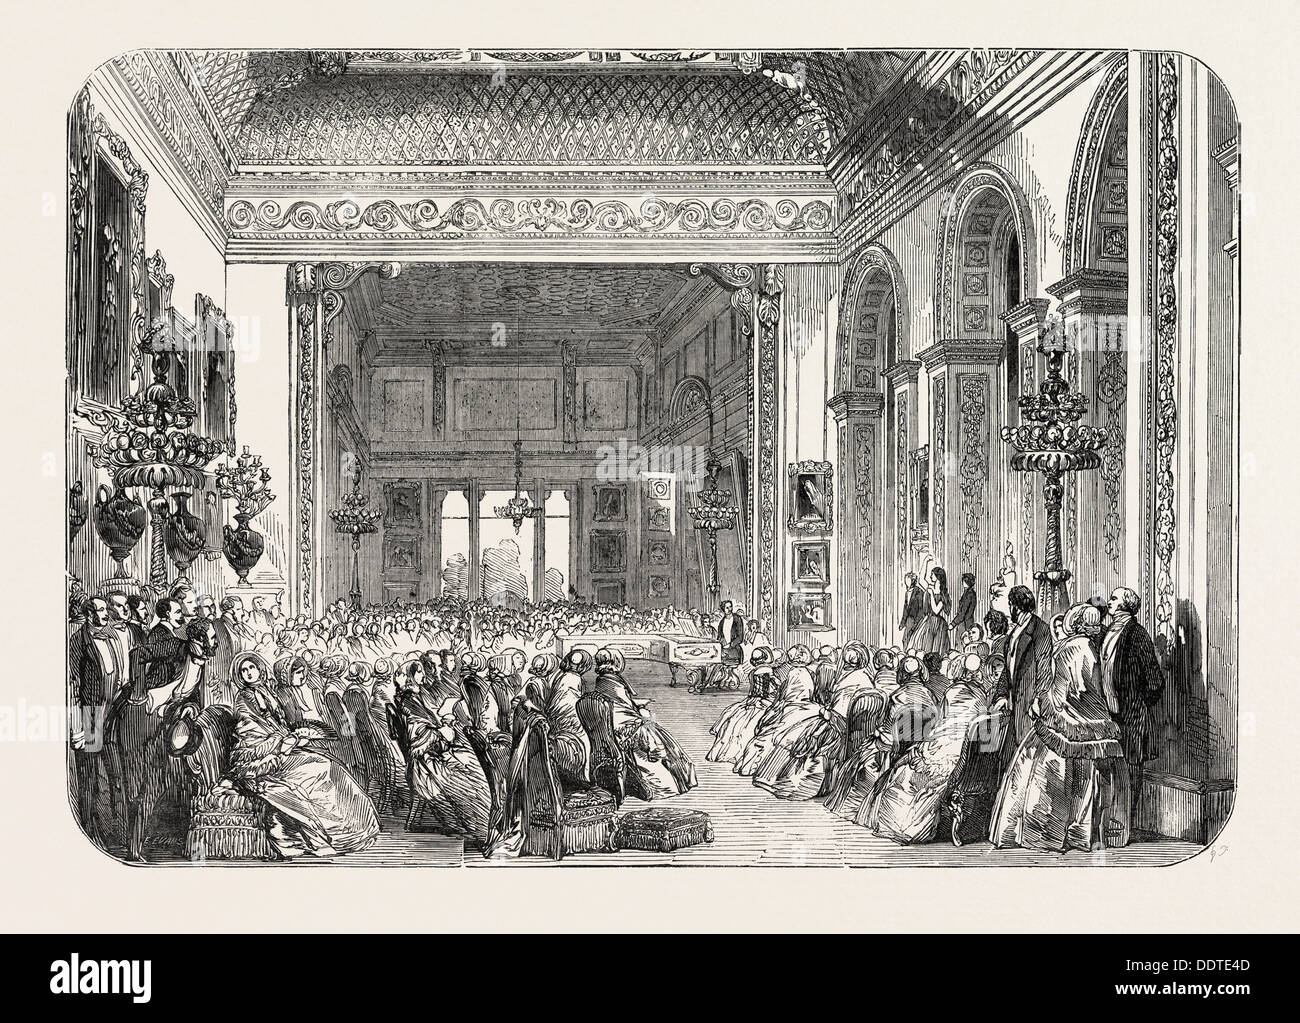 MATINEE MUSICALE AT STAFFORD HOUSE, LANCASTER HOUSE, LONDON, UK, 1851 engraving Stock Photo